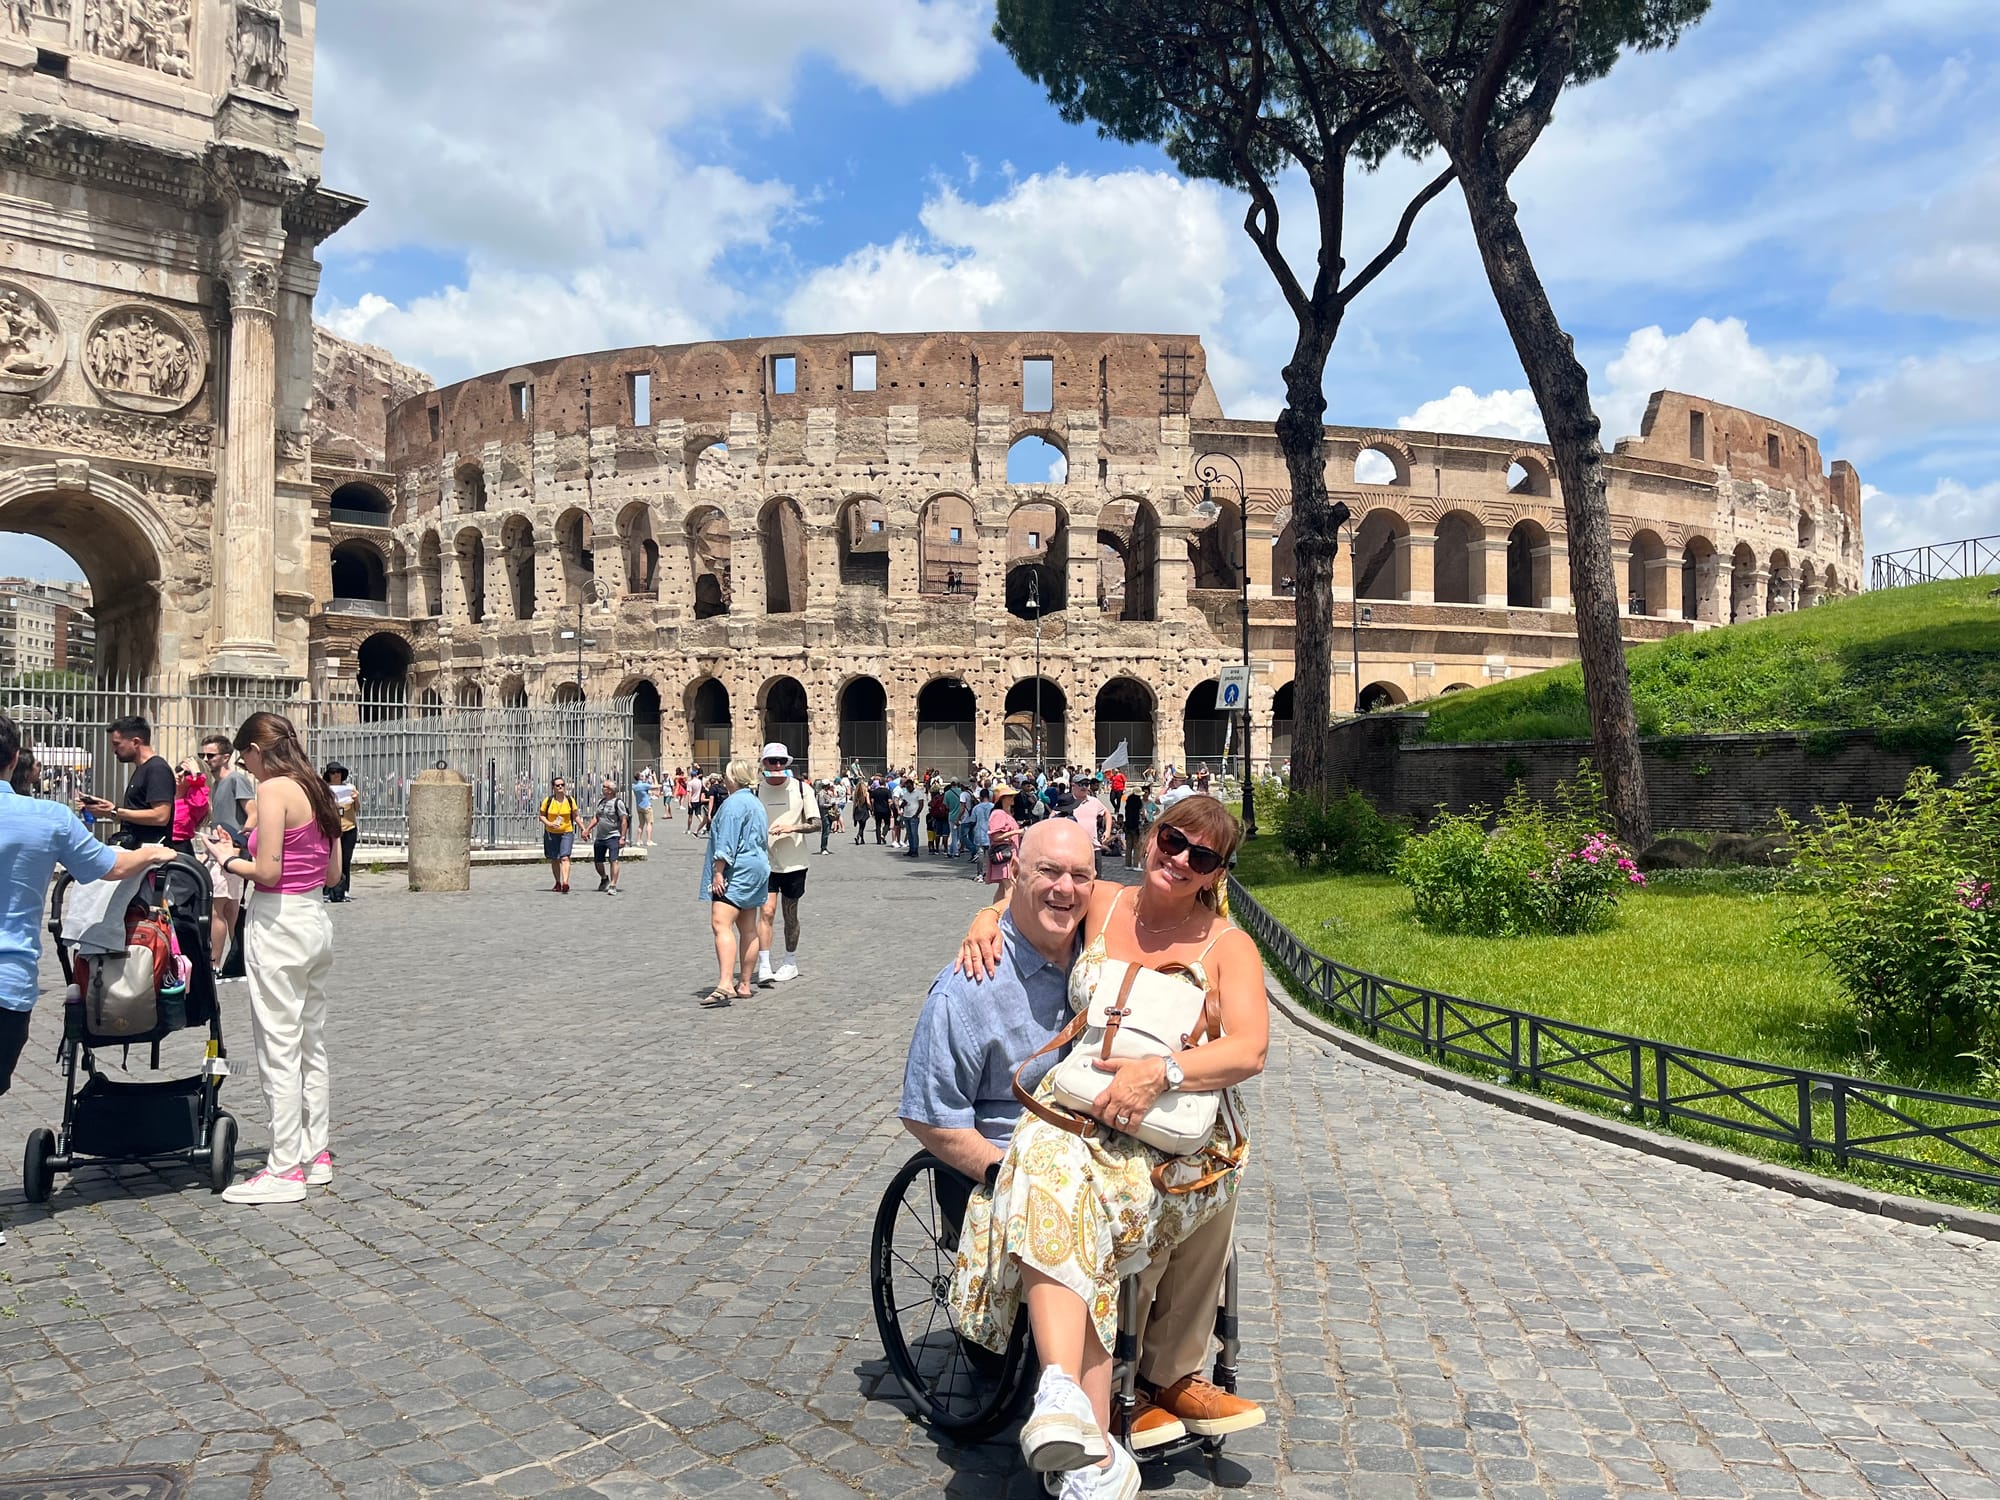 Wheelchair-user and companion posing with The Colosseum in the background